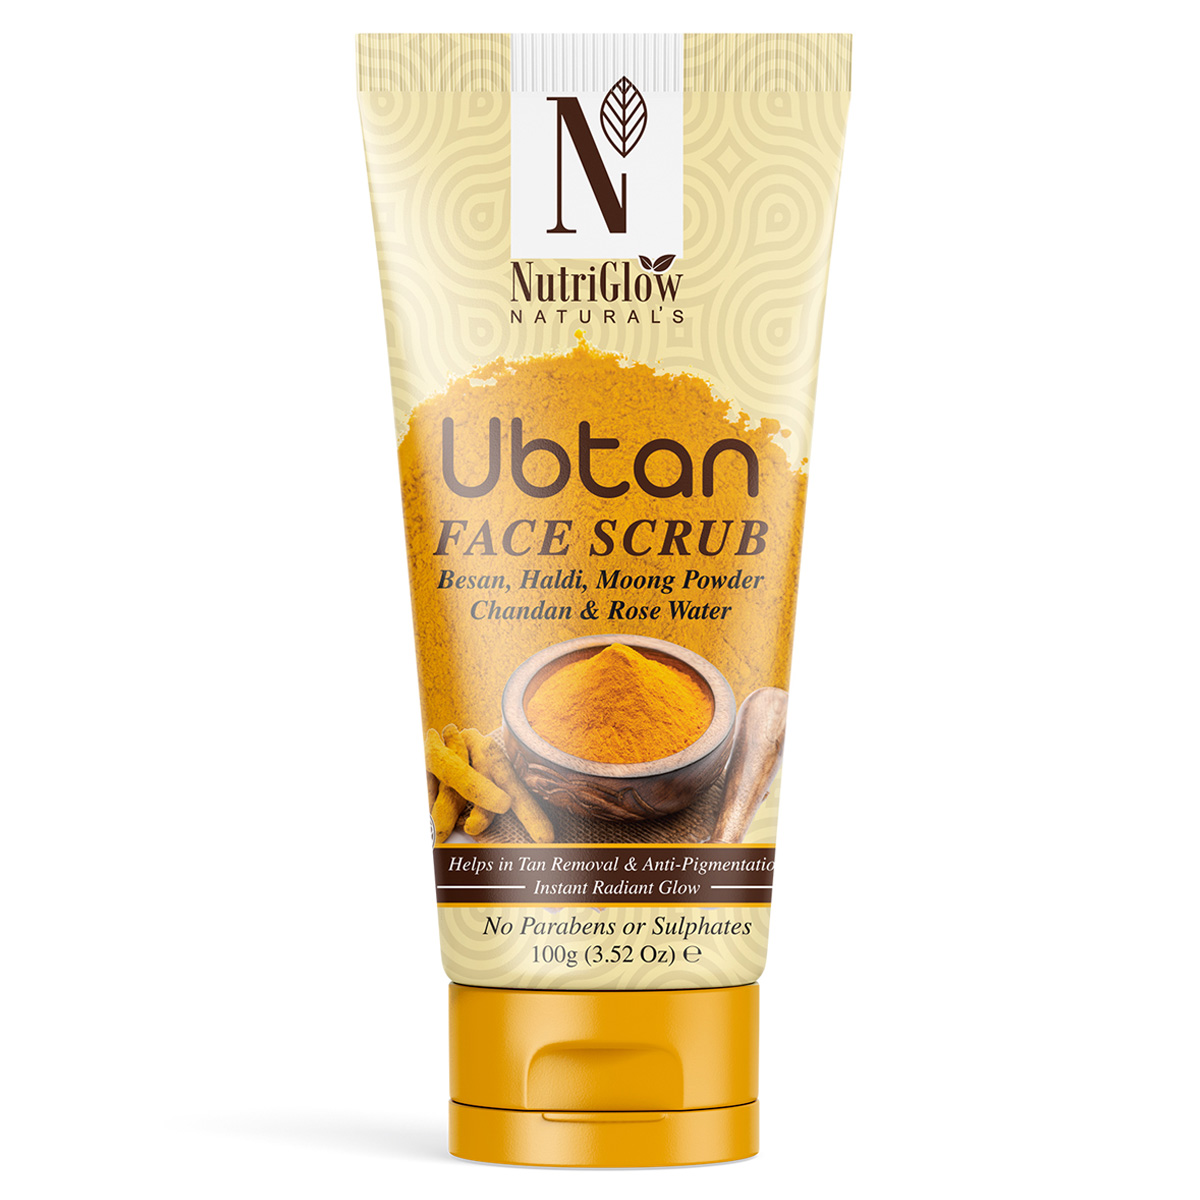 Nutriglow Natural’s Ubtan Face & Body Scrub With Besan & Rose Water, 100gm